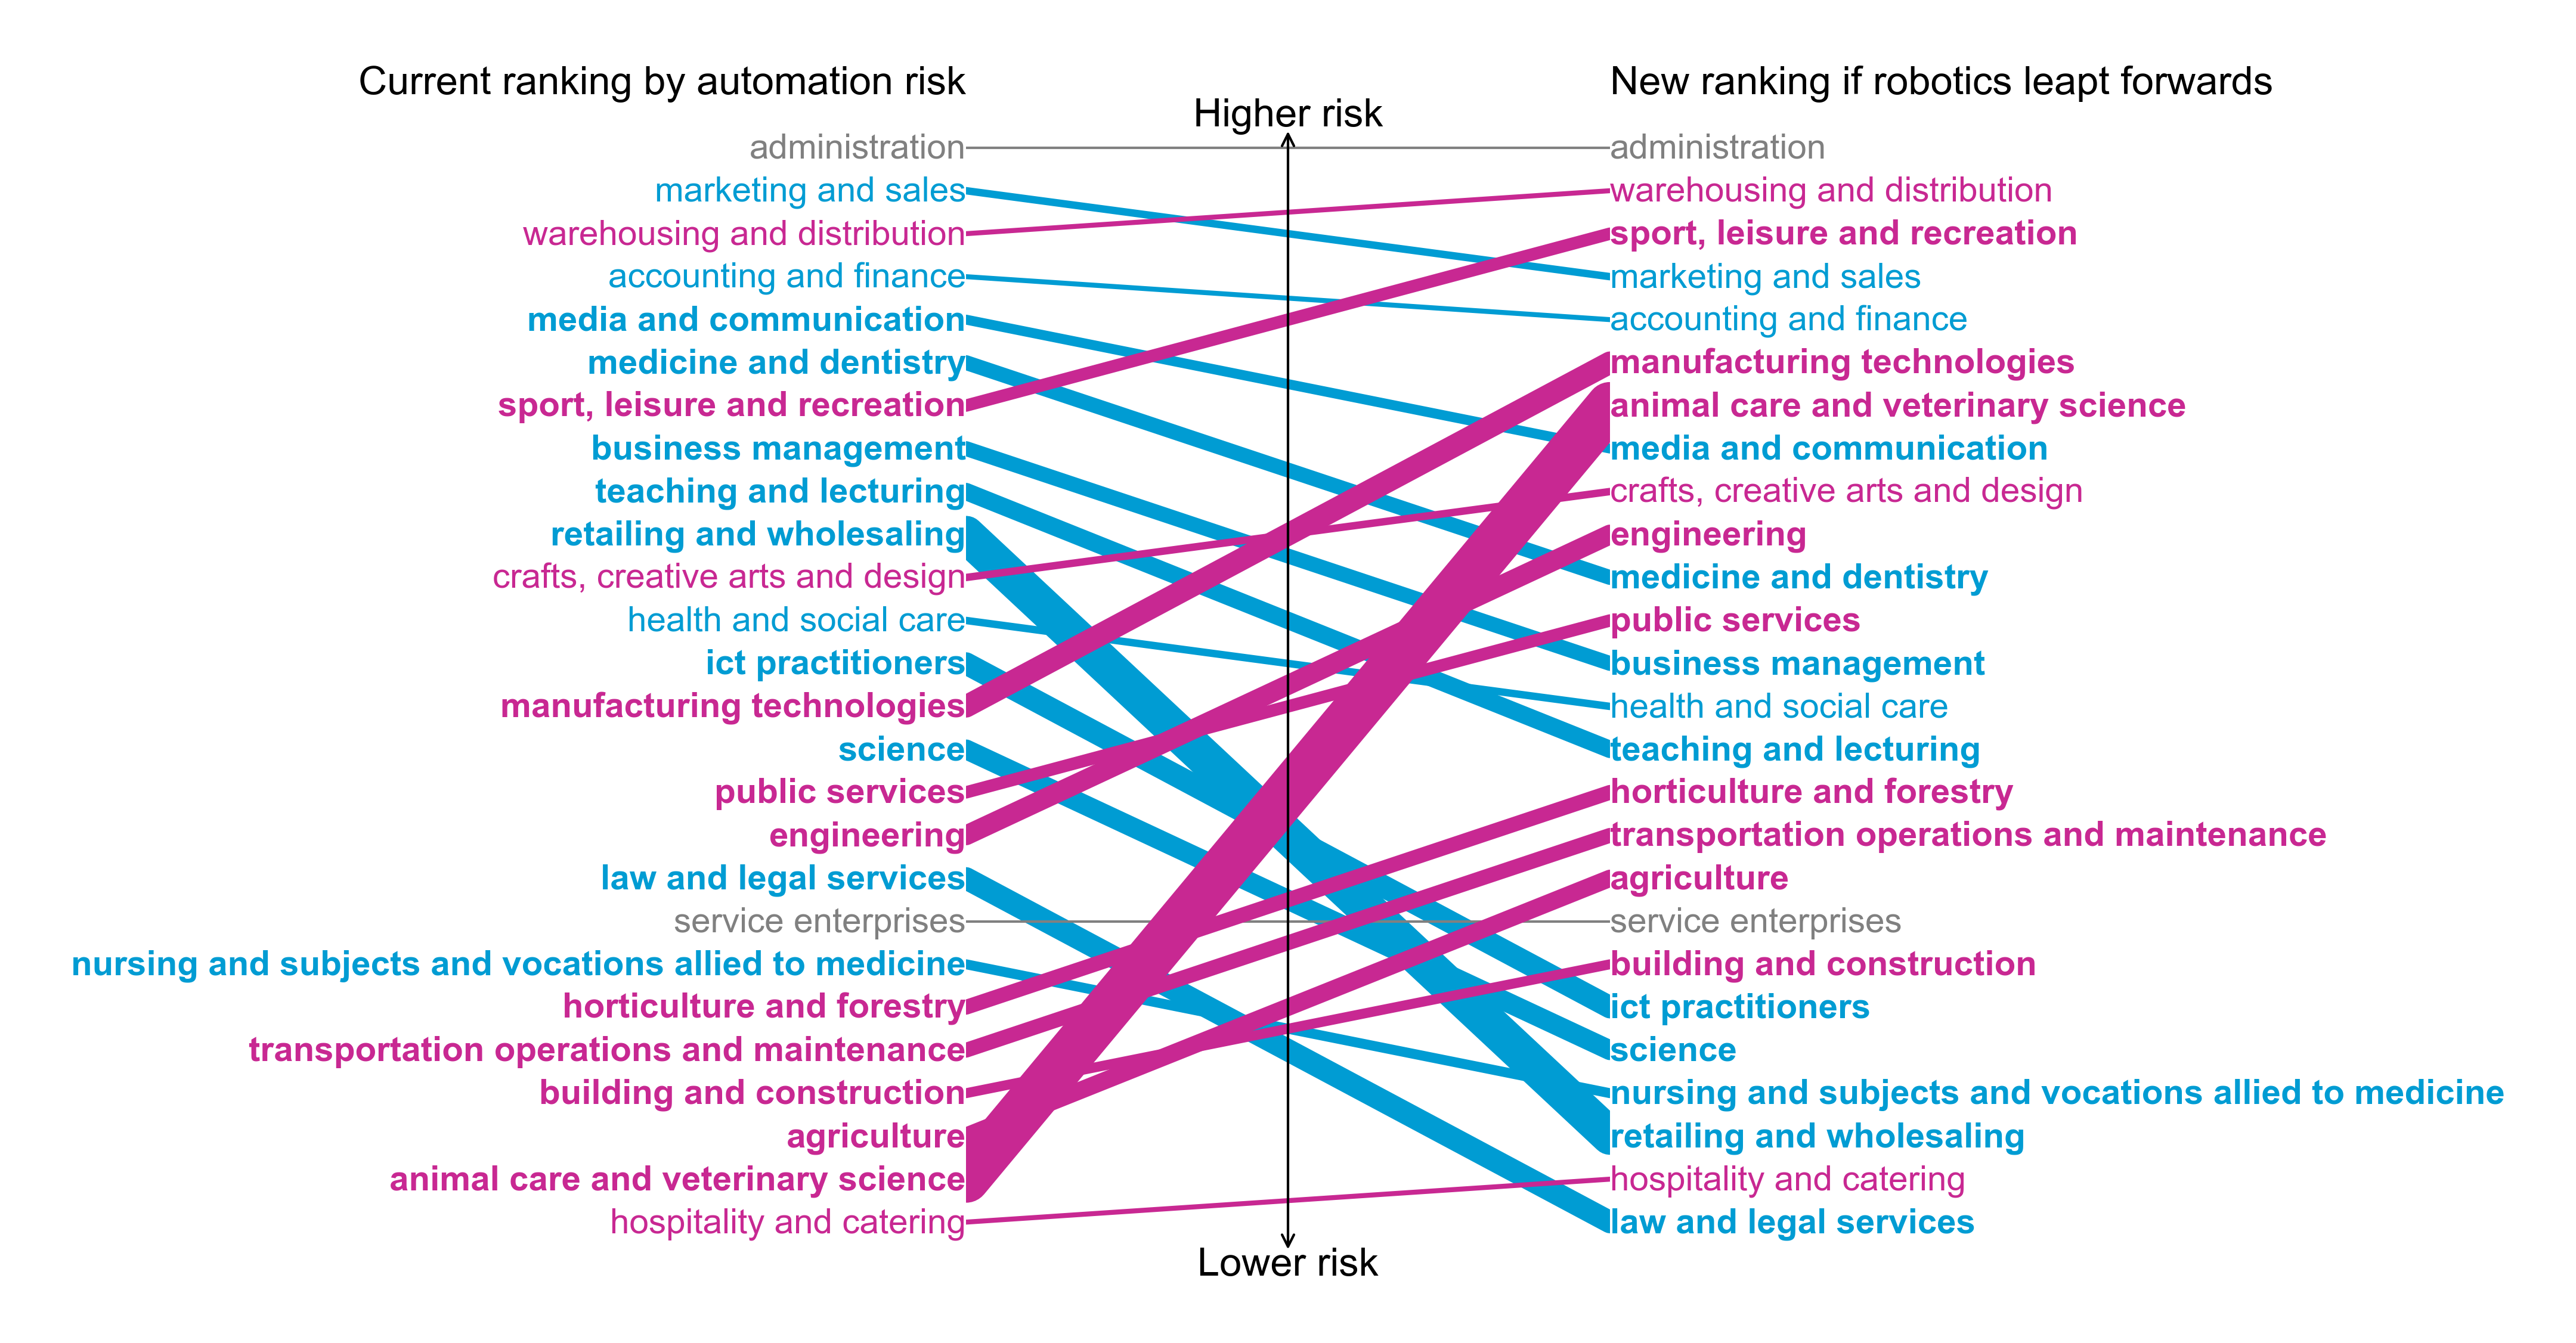 Figure 6: Impact of robotic innovation on relative automation risk among apprenticeships